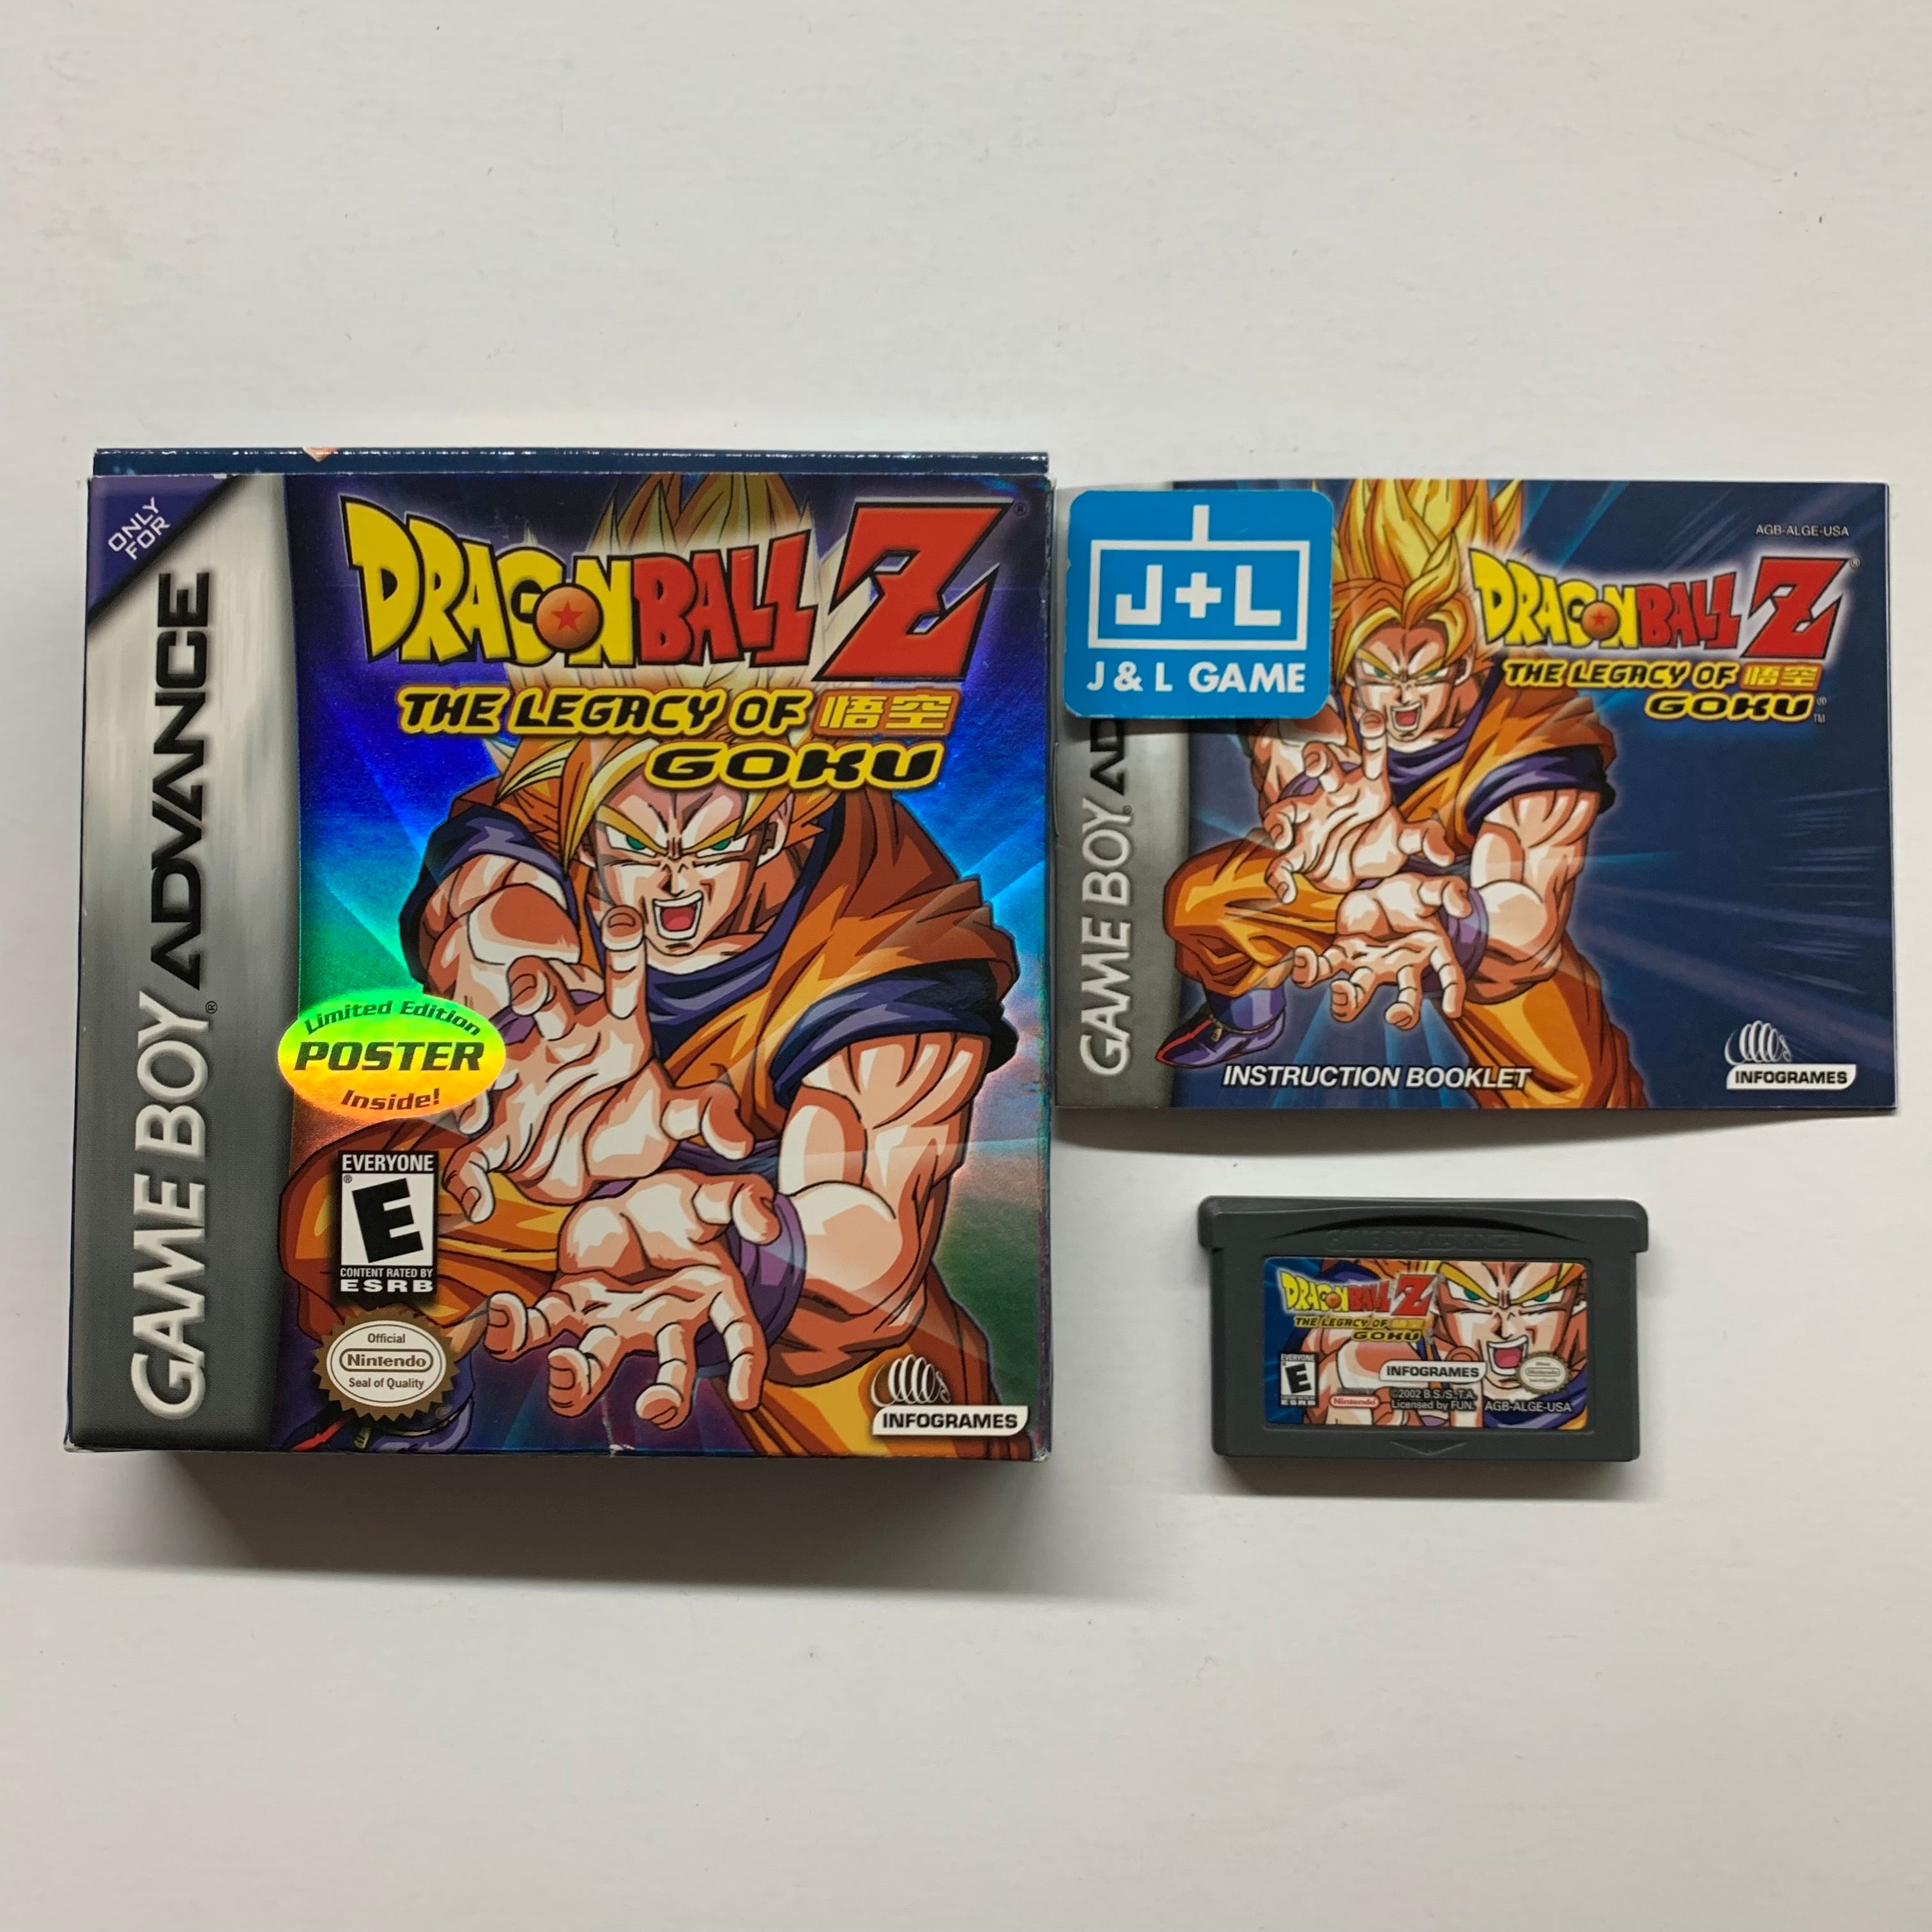 Dragon Ball Z: The Legacy of Goku - (GBA) Game Boy Advance [Pre-Owned] Video Games Infogrames   